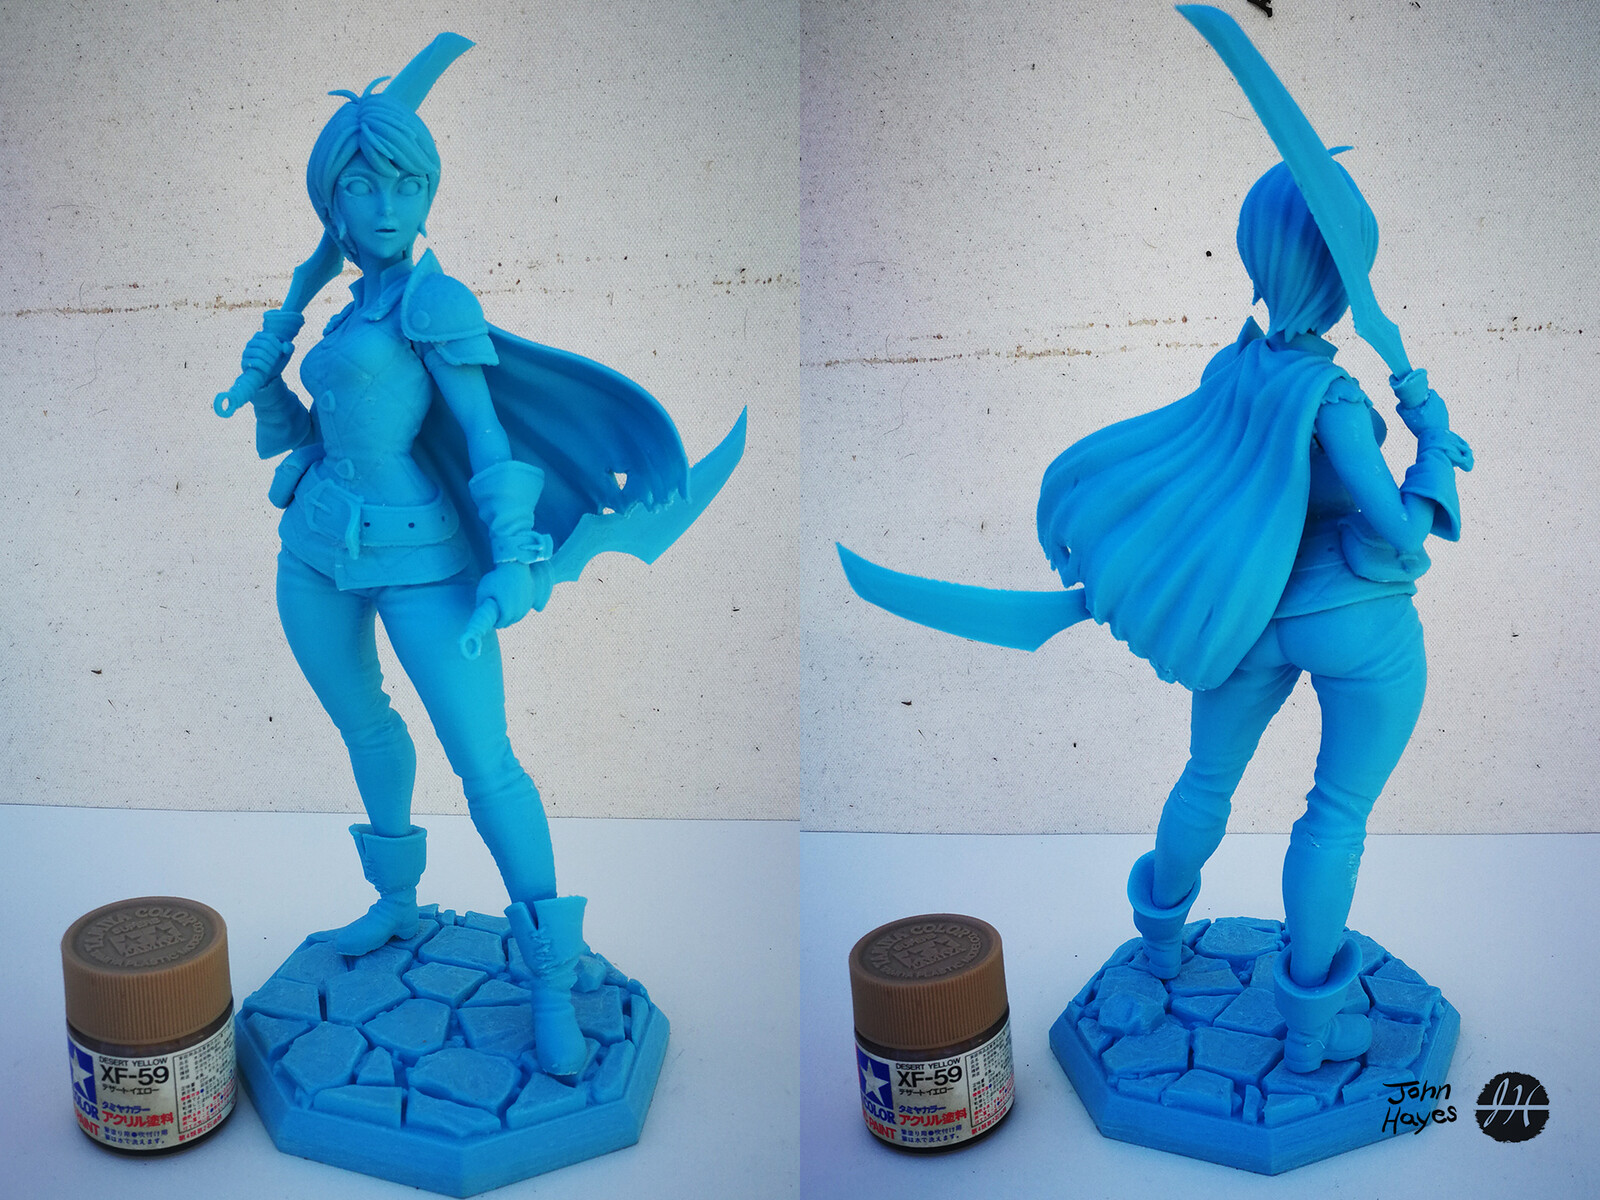 3D print  "test" using my Ultimaker 2+ with  Polymaker light blue ABS filament.

Assembled figure is ~ 25cm tall